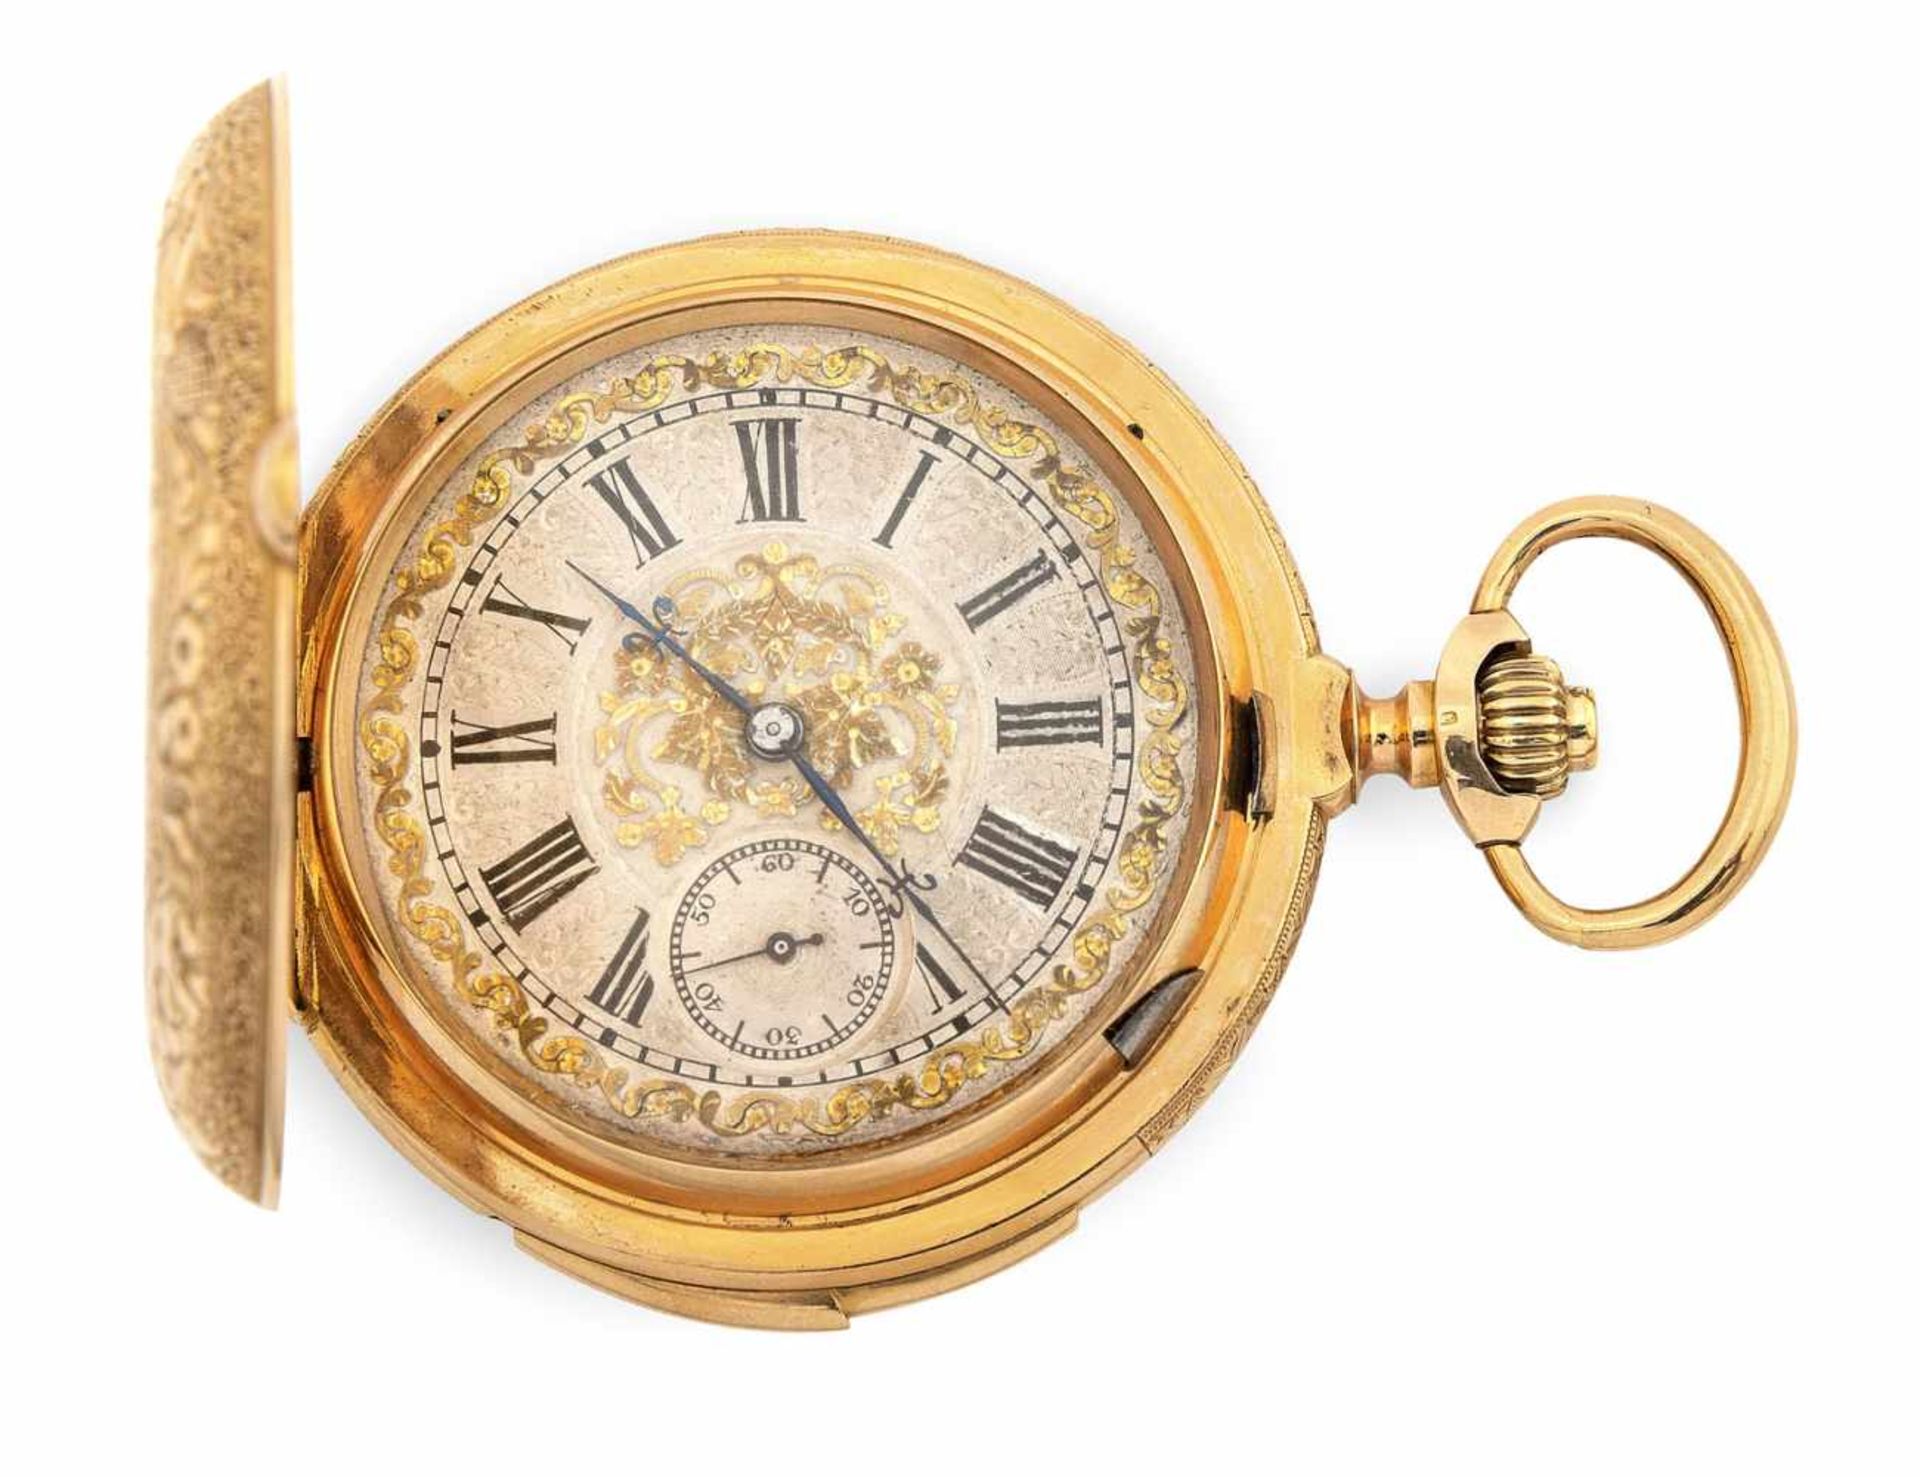 A fine 18ct. gold savonette hunter watch, signed C.J & A. PERRENOUD & CIE. LE LOCLE, N°1195,